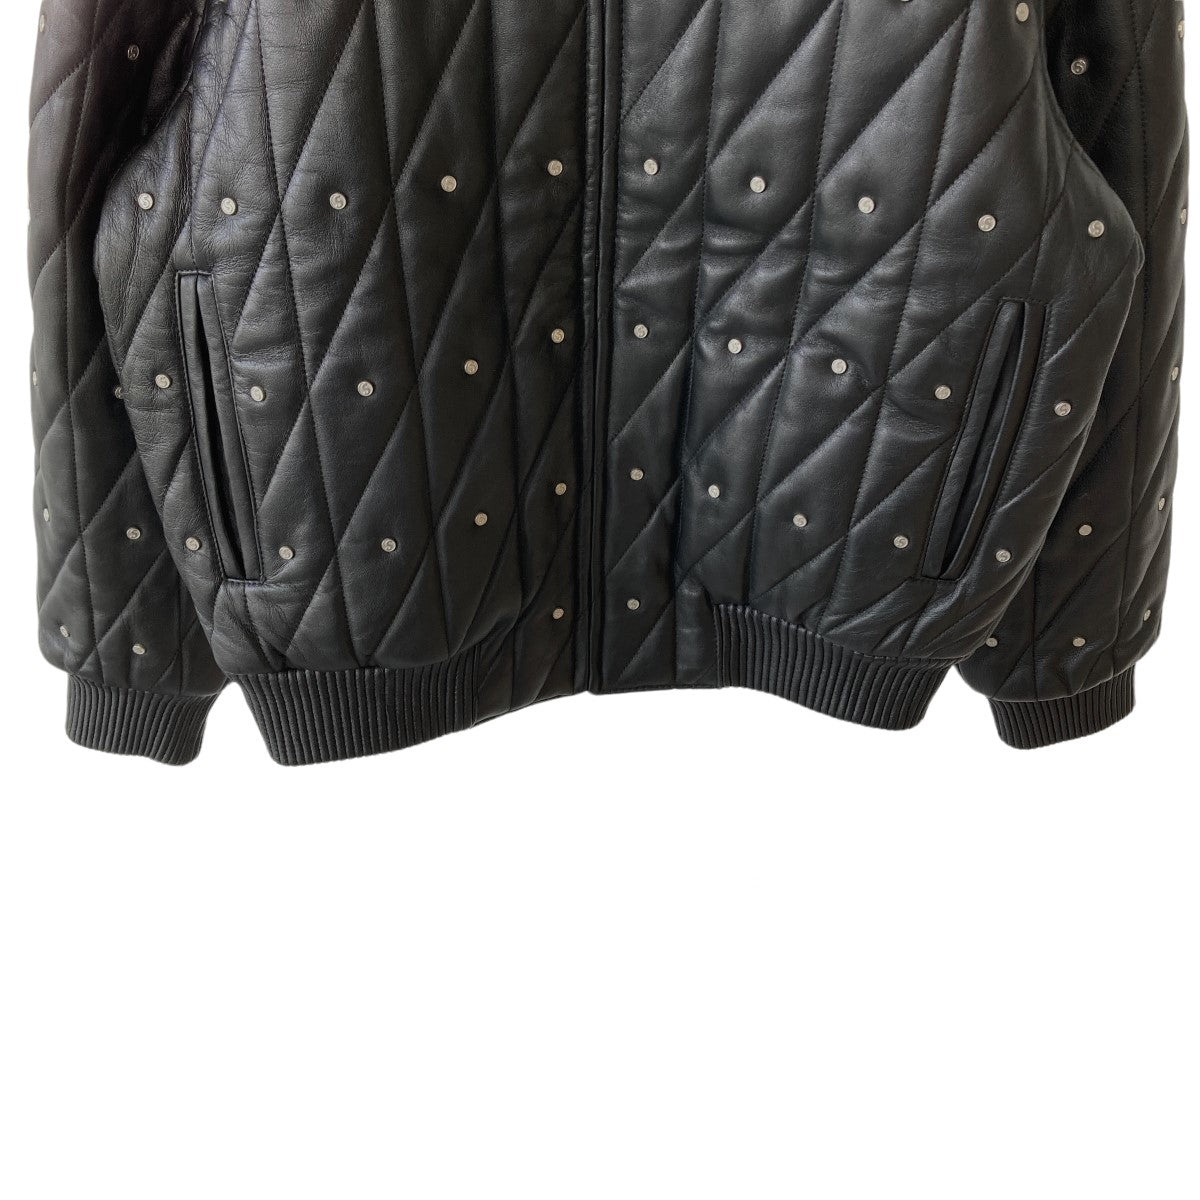 SUPREME(シュプリーム) 18AW Quilted Studded Leather Jacket レザー ...